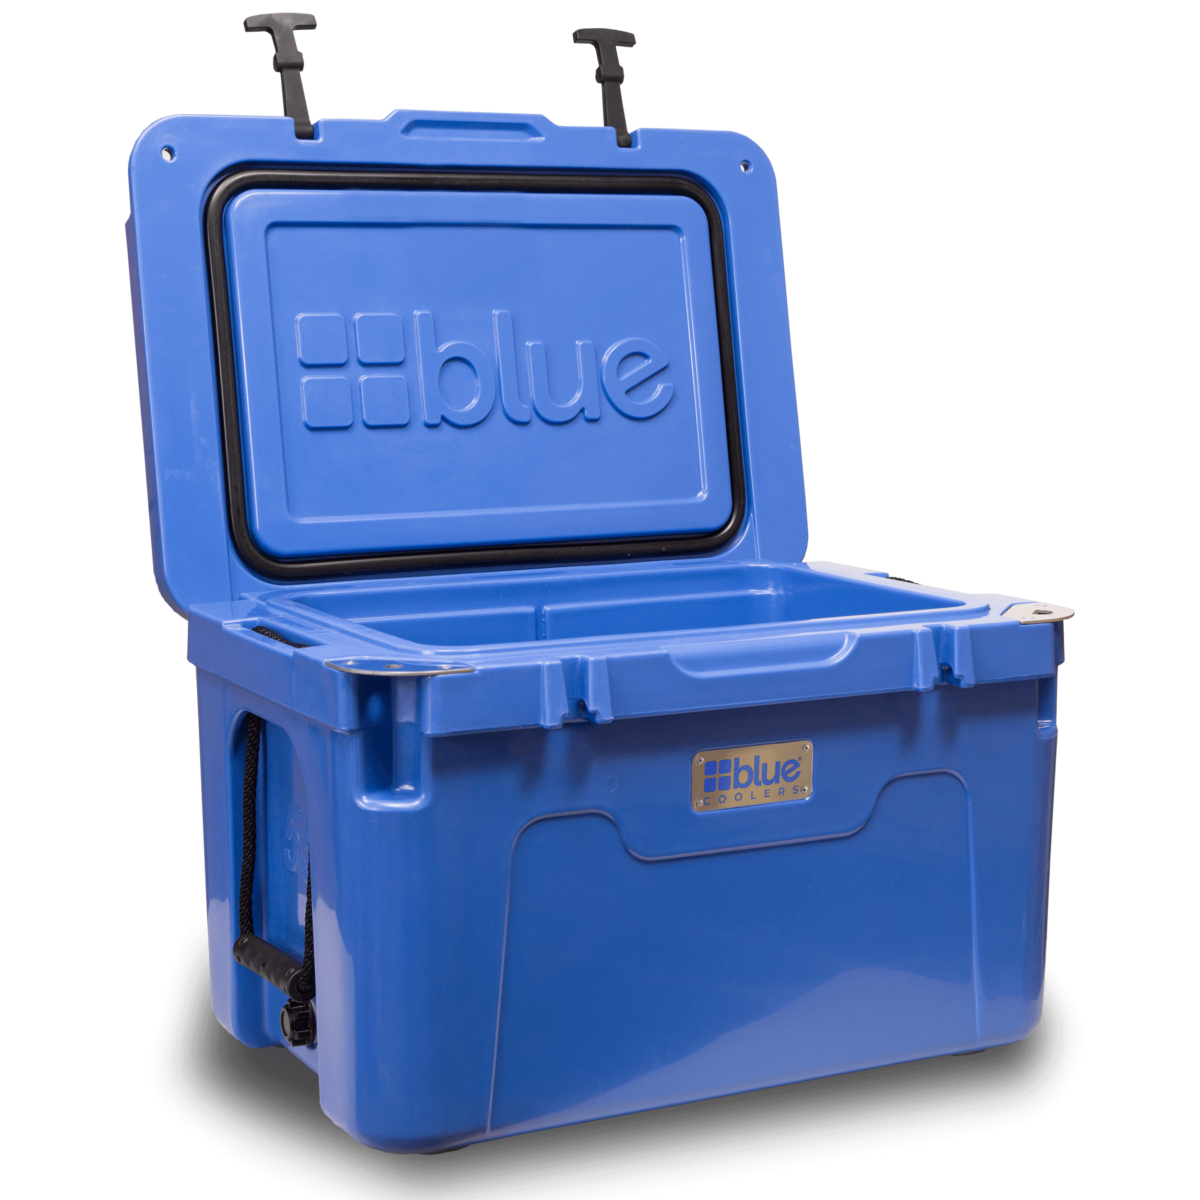 55Q Ice Vault Cooler Blue 2 | Limitless Gear | Outdoor, Camping and Adventure Gear